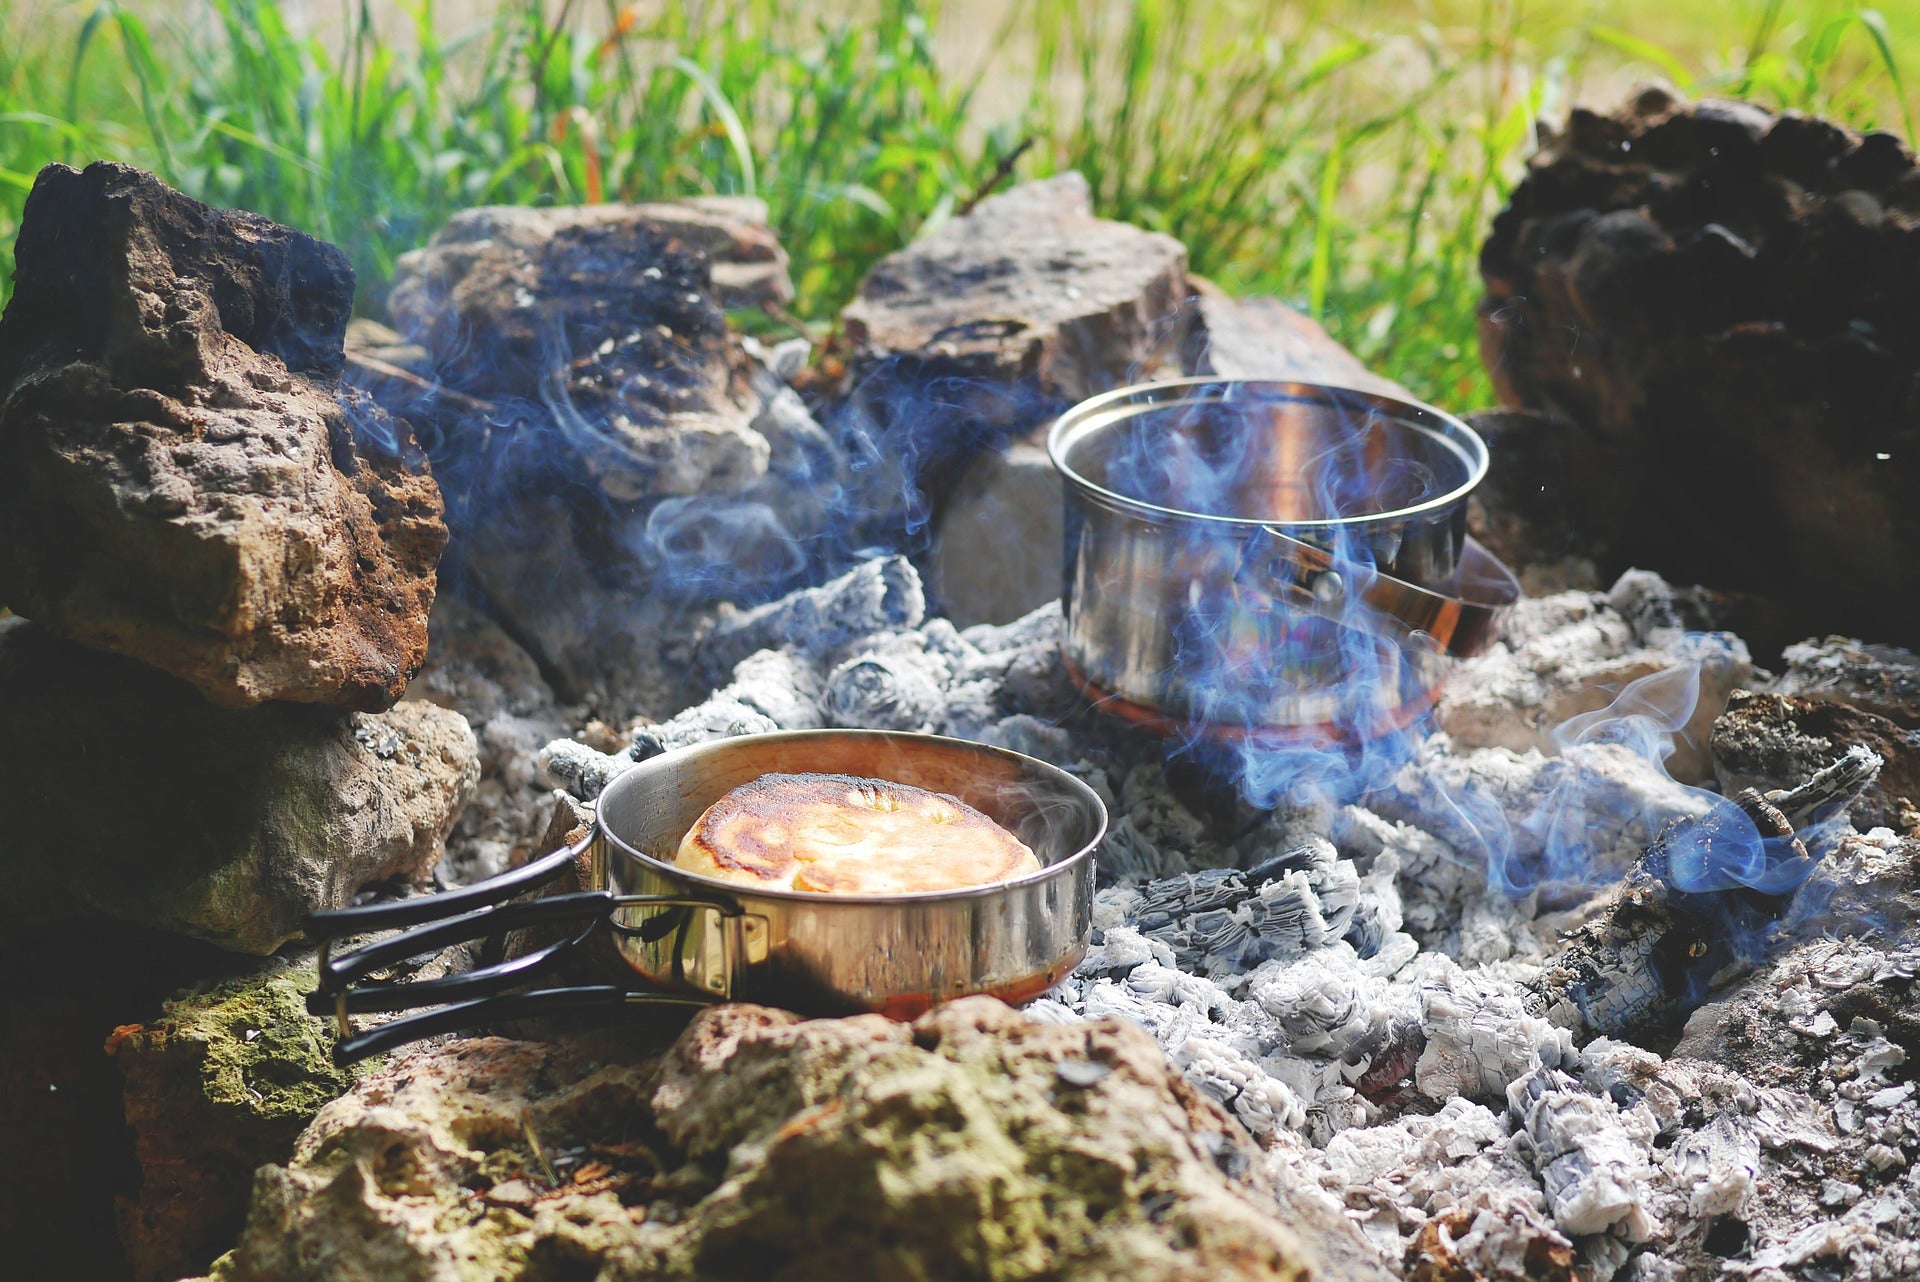 Camping Cooking Sets